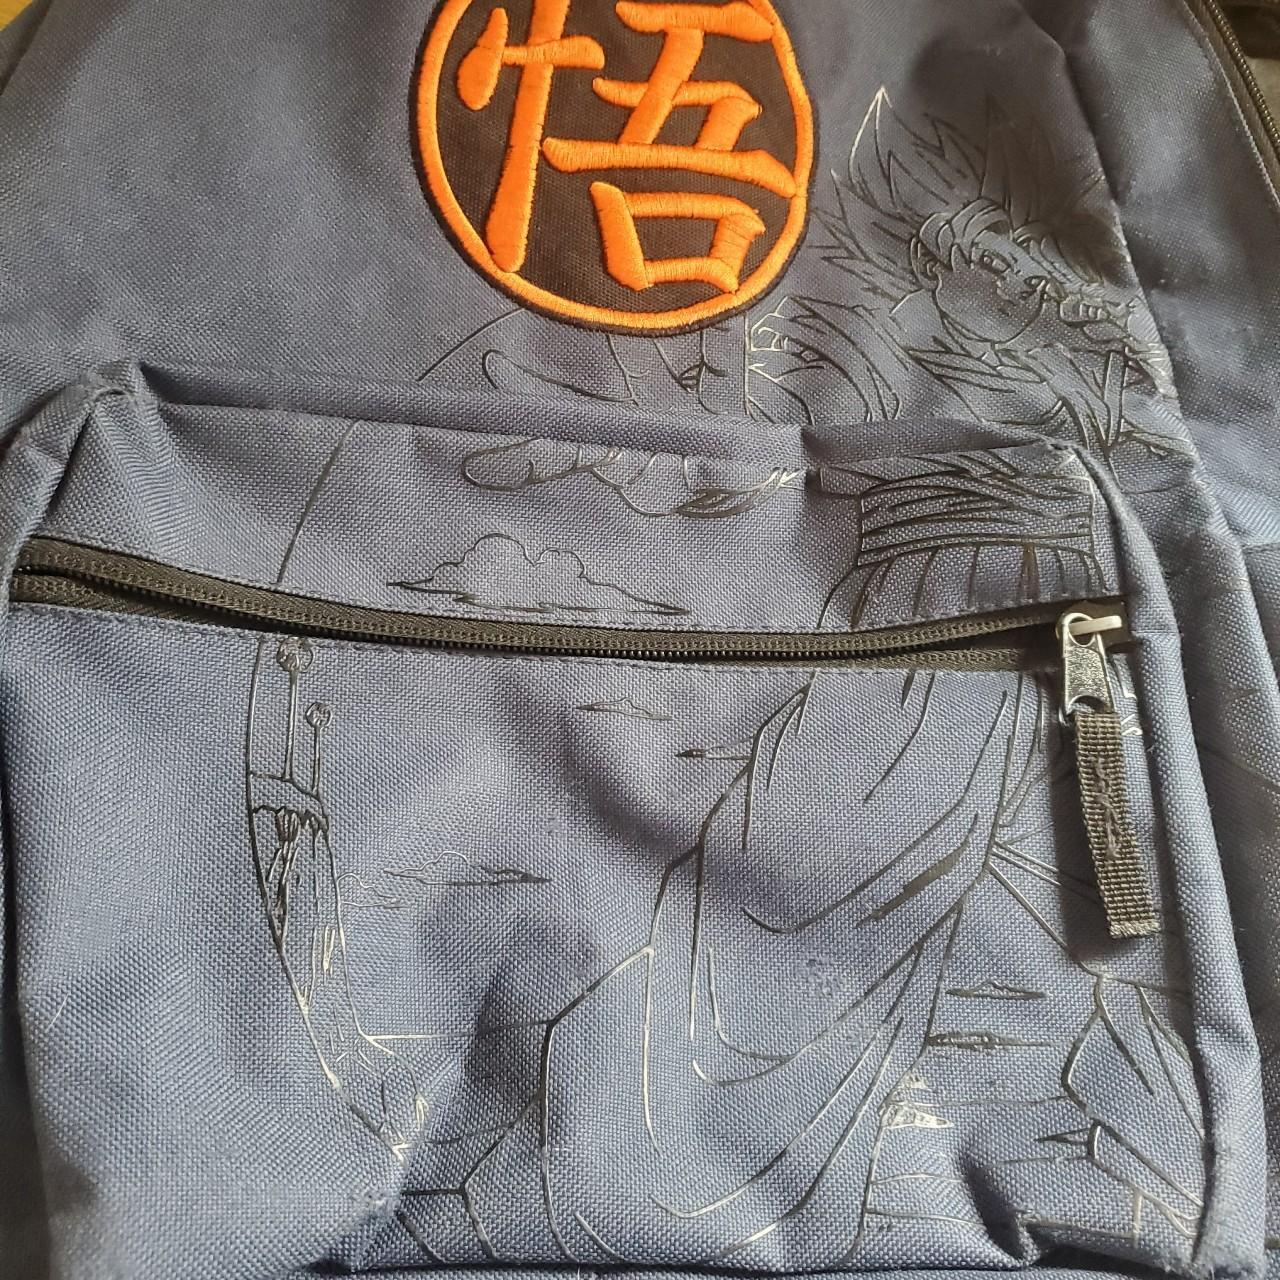 DBZ Backpack used, cleaned, stitching almost - Depop